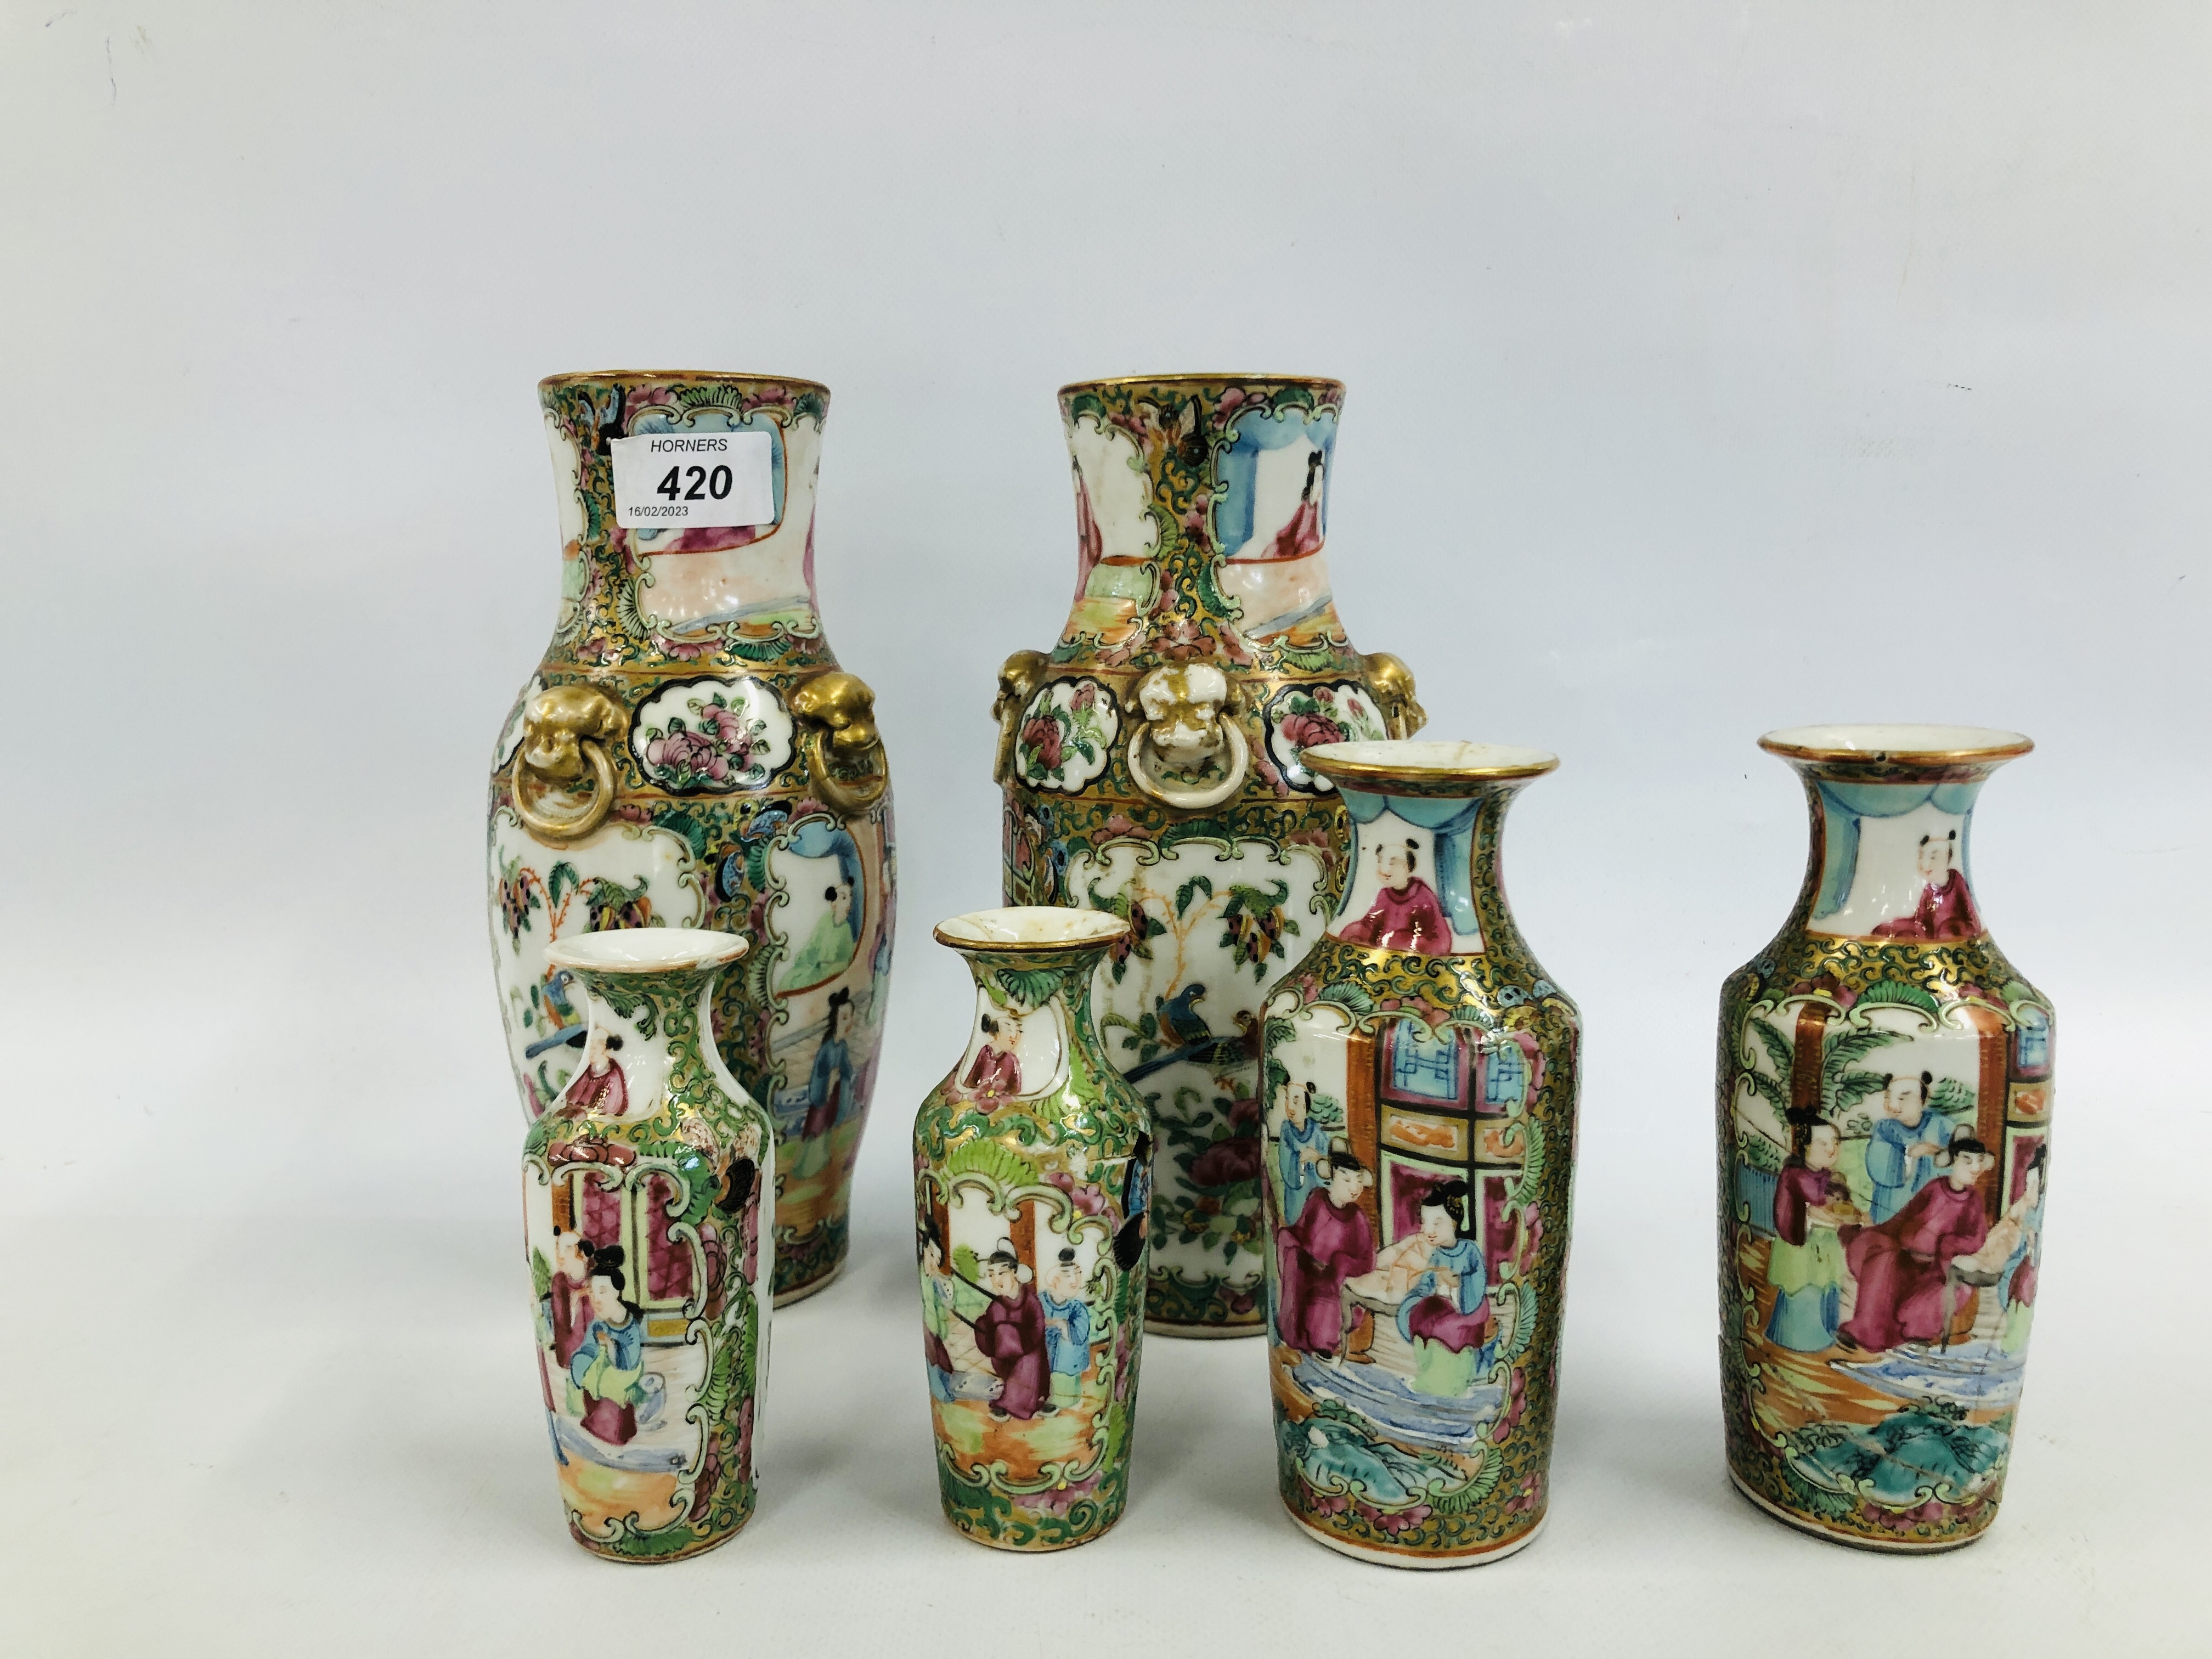 3 X PAIRS OF CANTONESE FAMILLE ROSE VASES, THE LARGEST H 22.5CM (GOOD CONDITION, THE OTHERS H 14.